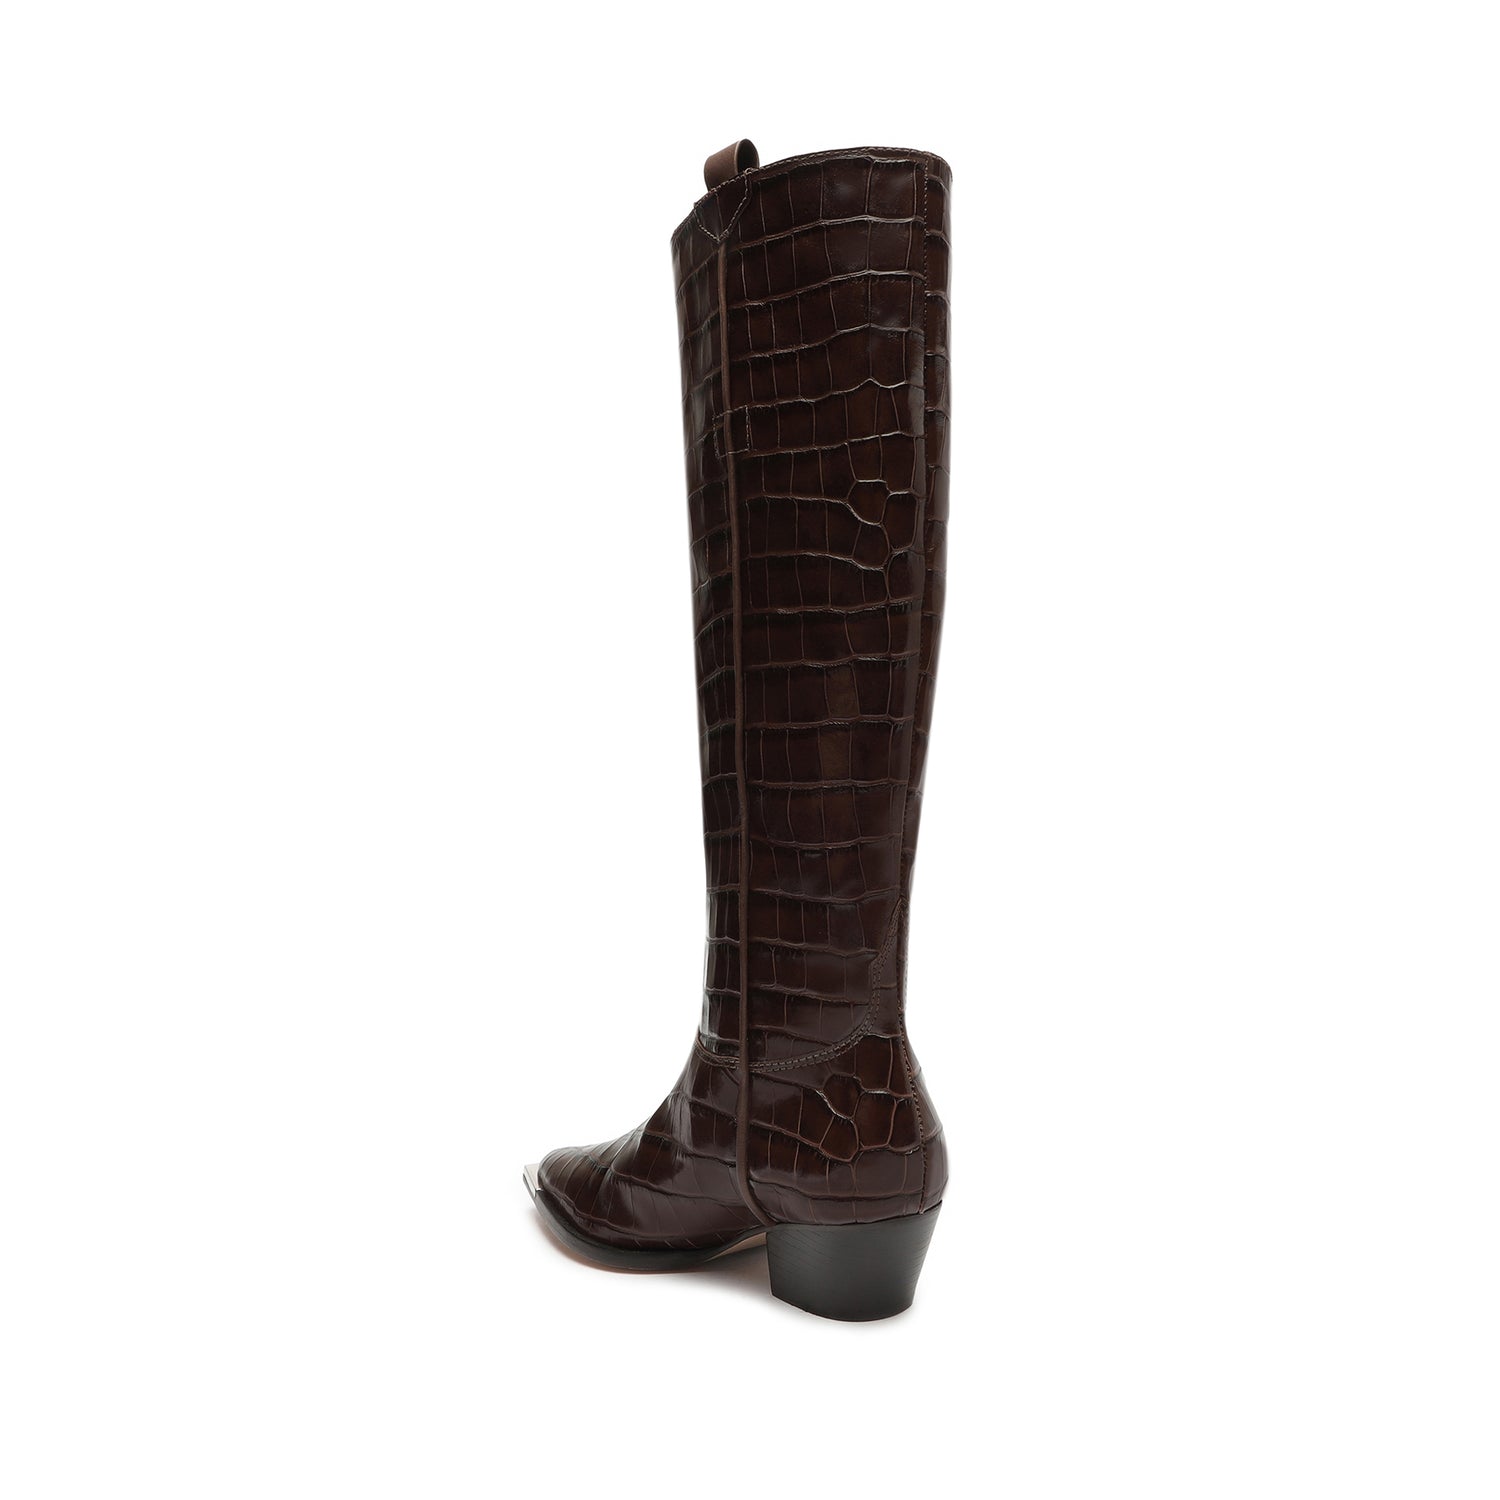 Tessie Casual Up Crocodile-Embossed Leather Boot Boots OLD    - Schutz Shoes